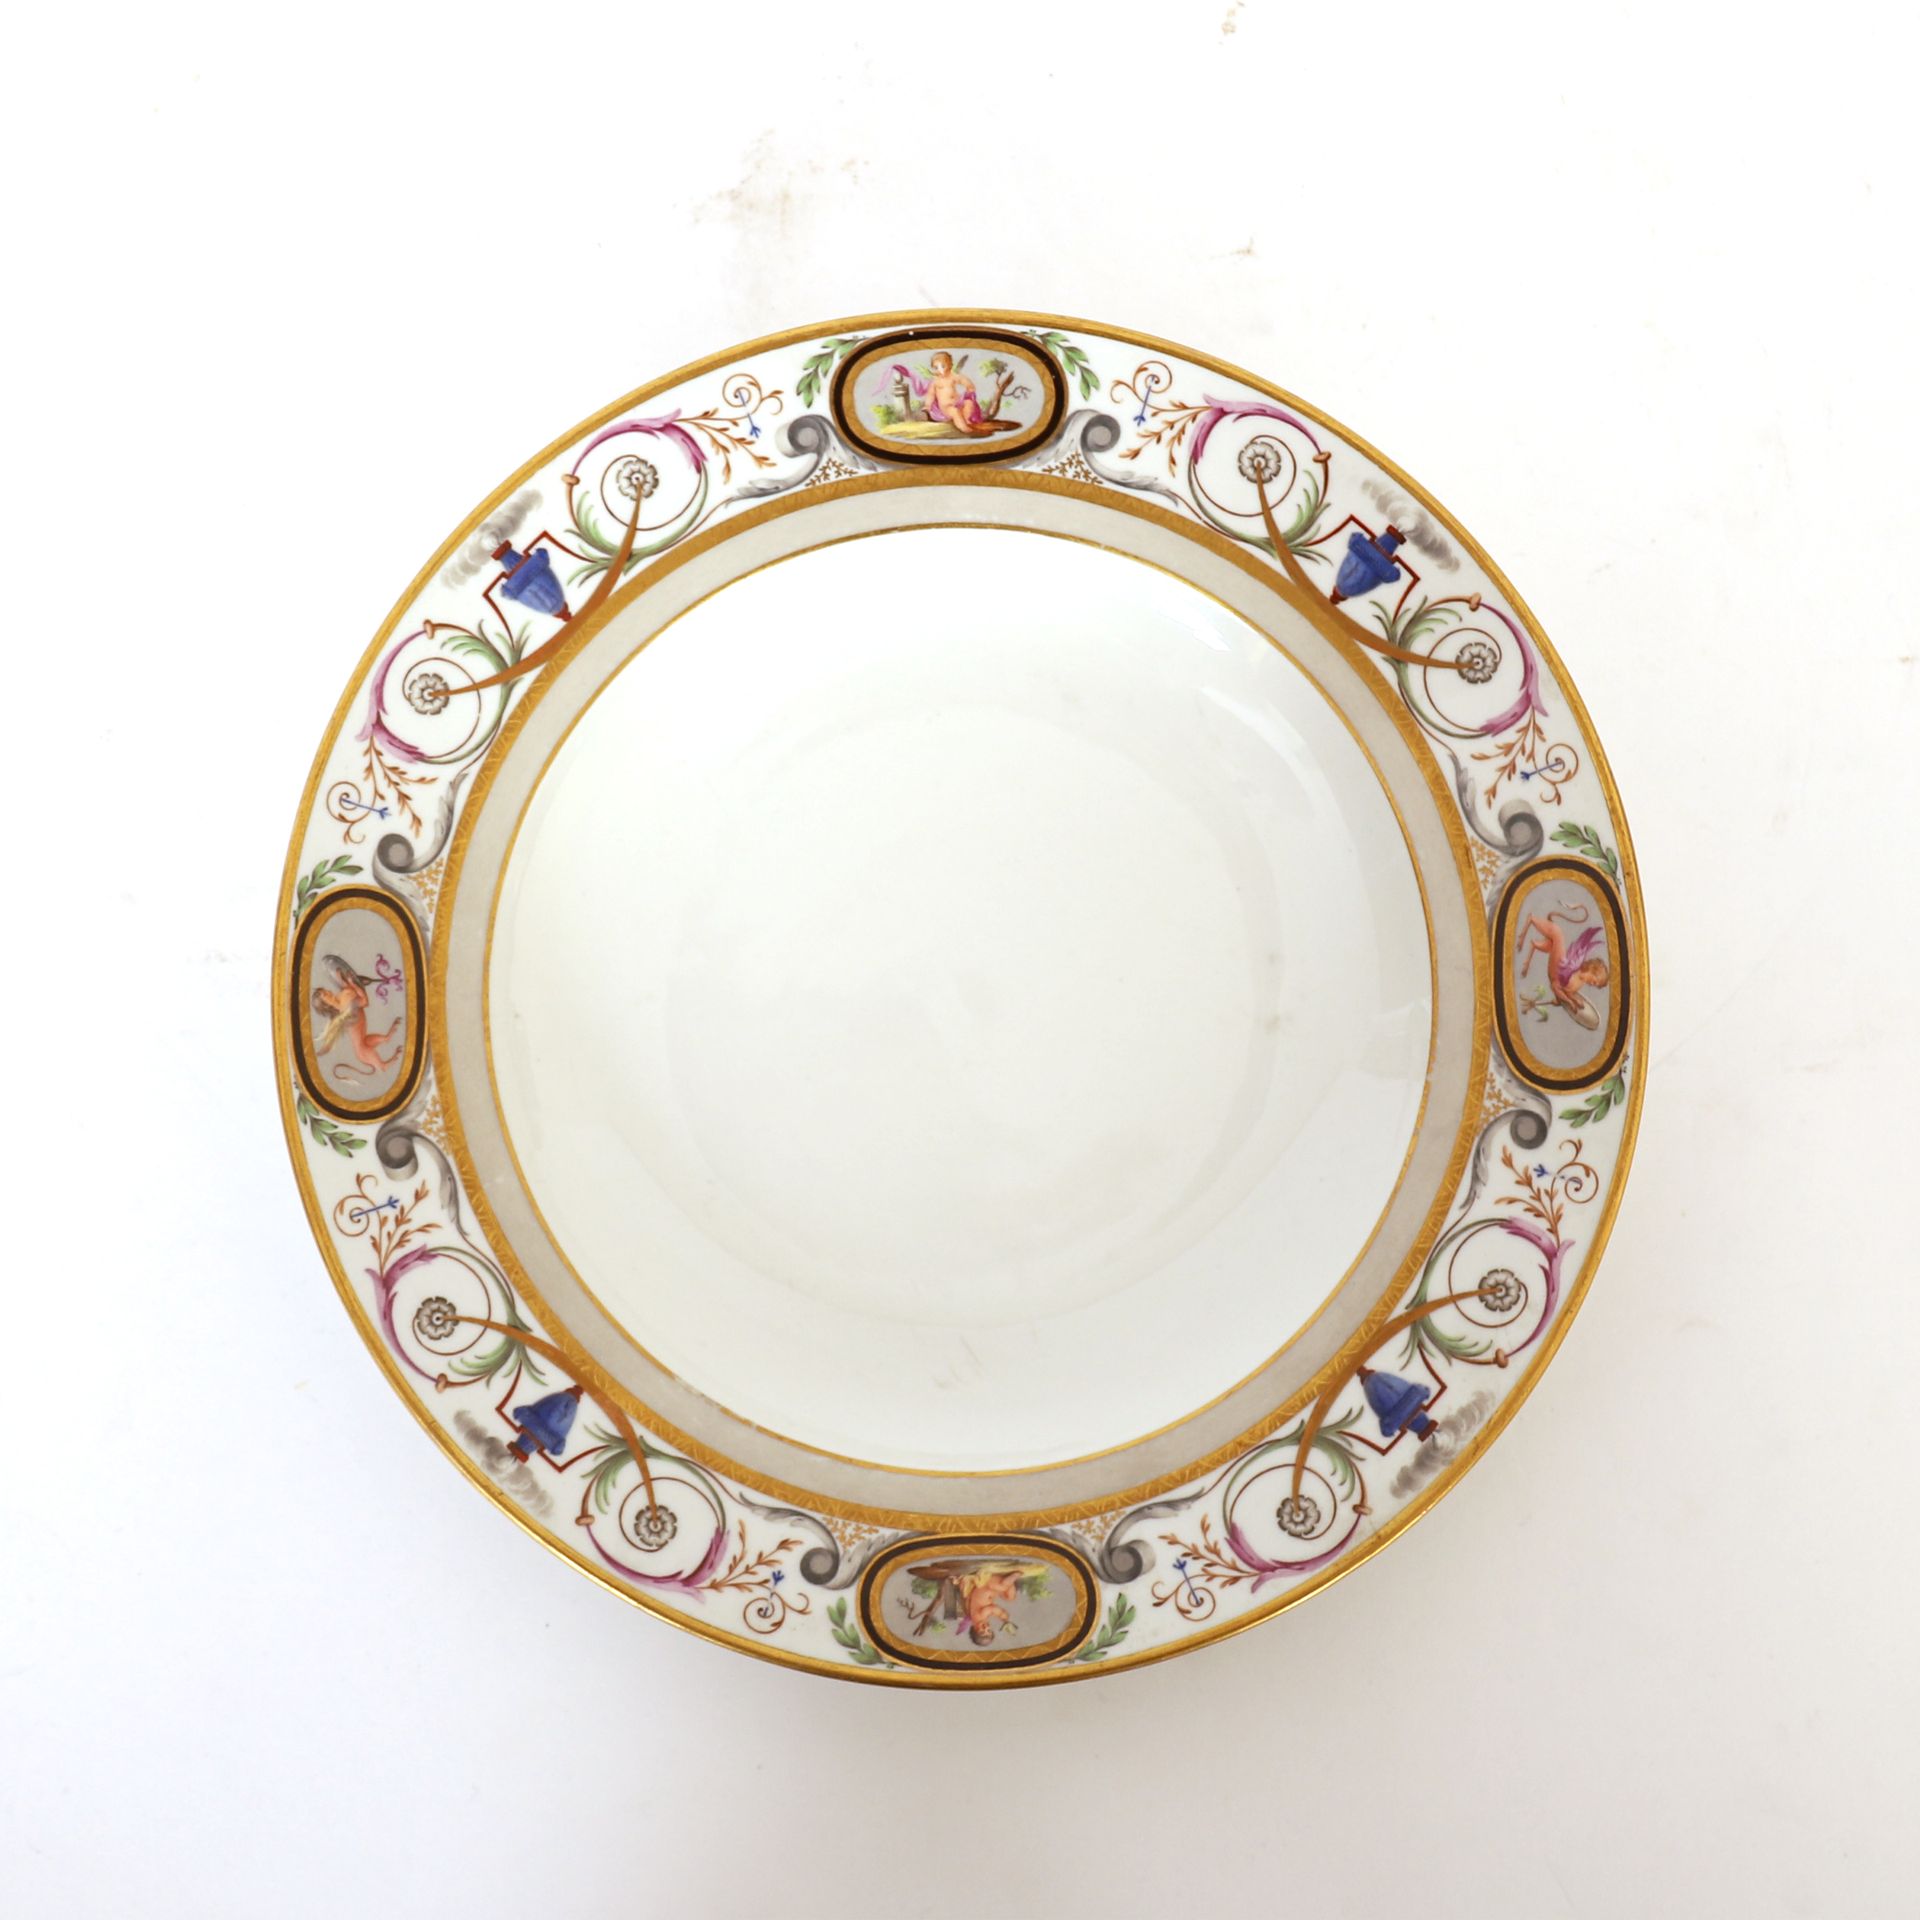 Null VIENNA PORCELAIN DISH, late 18th - early 19th century

Marli decorated with&hellip;